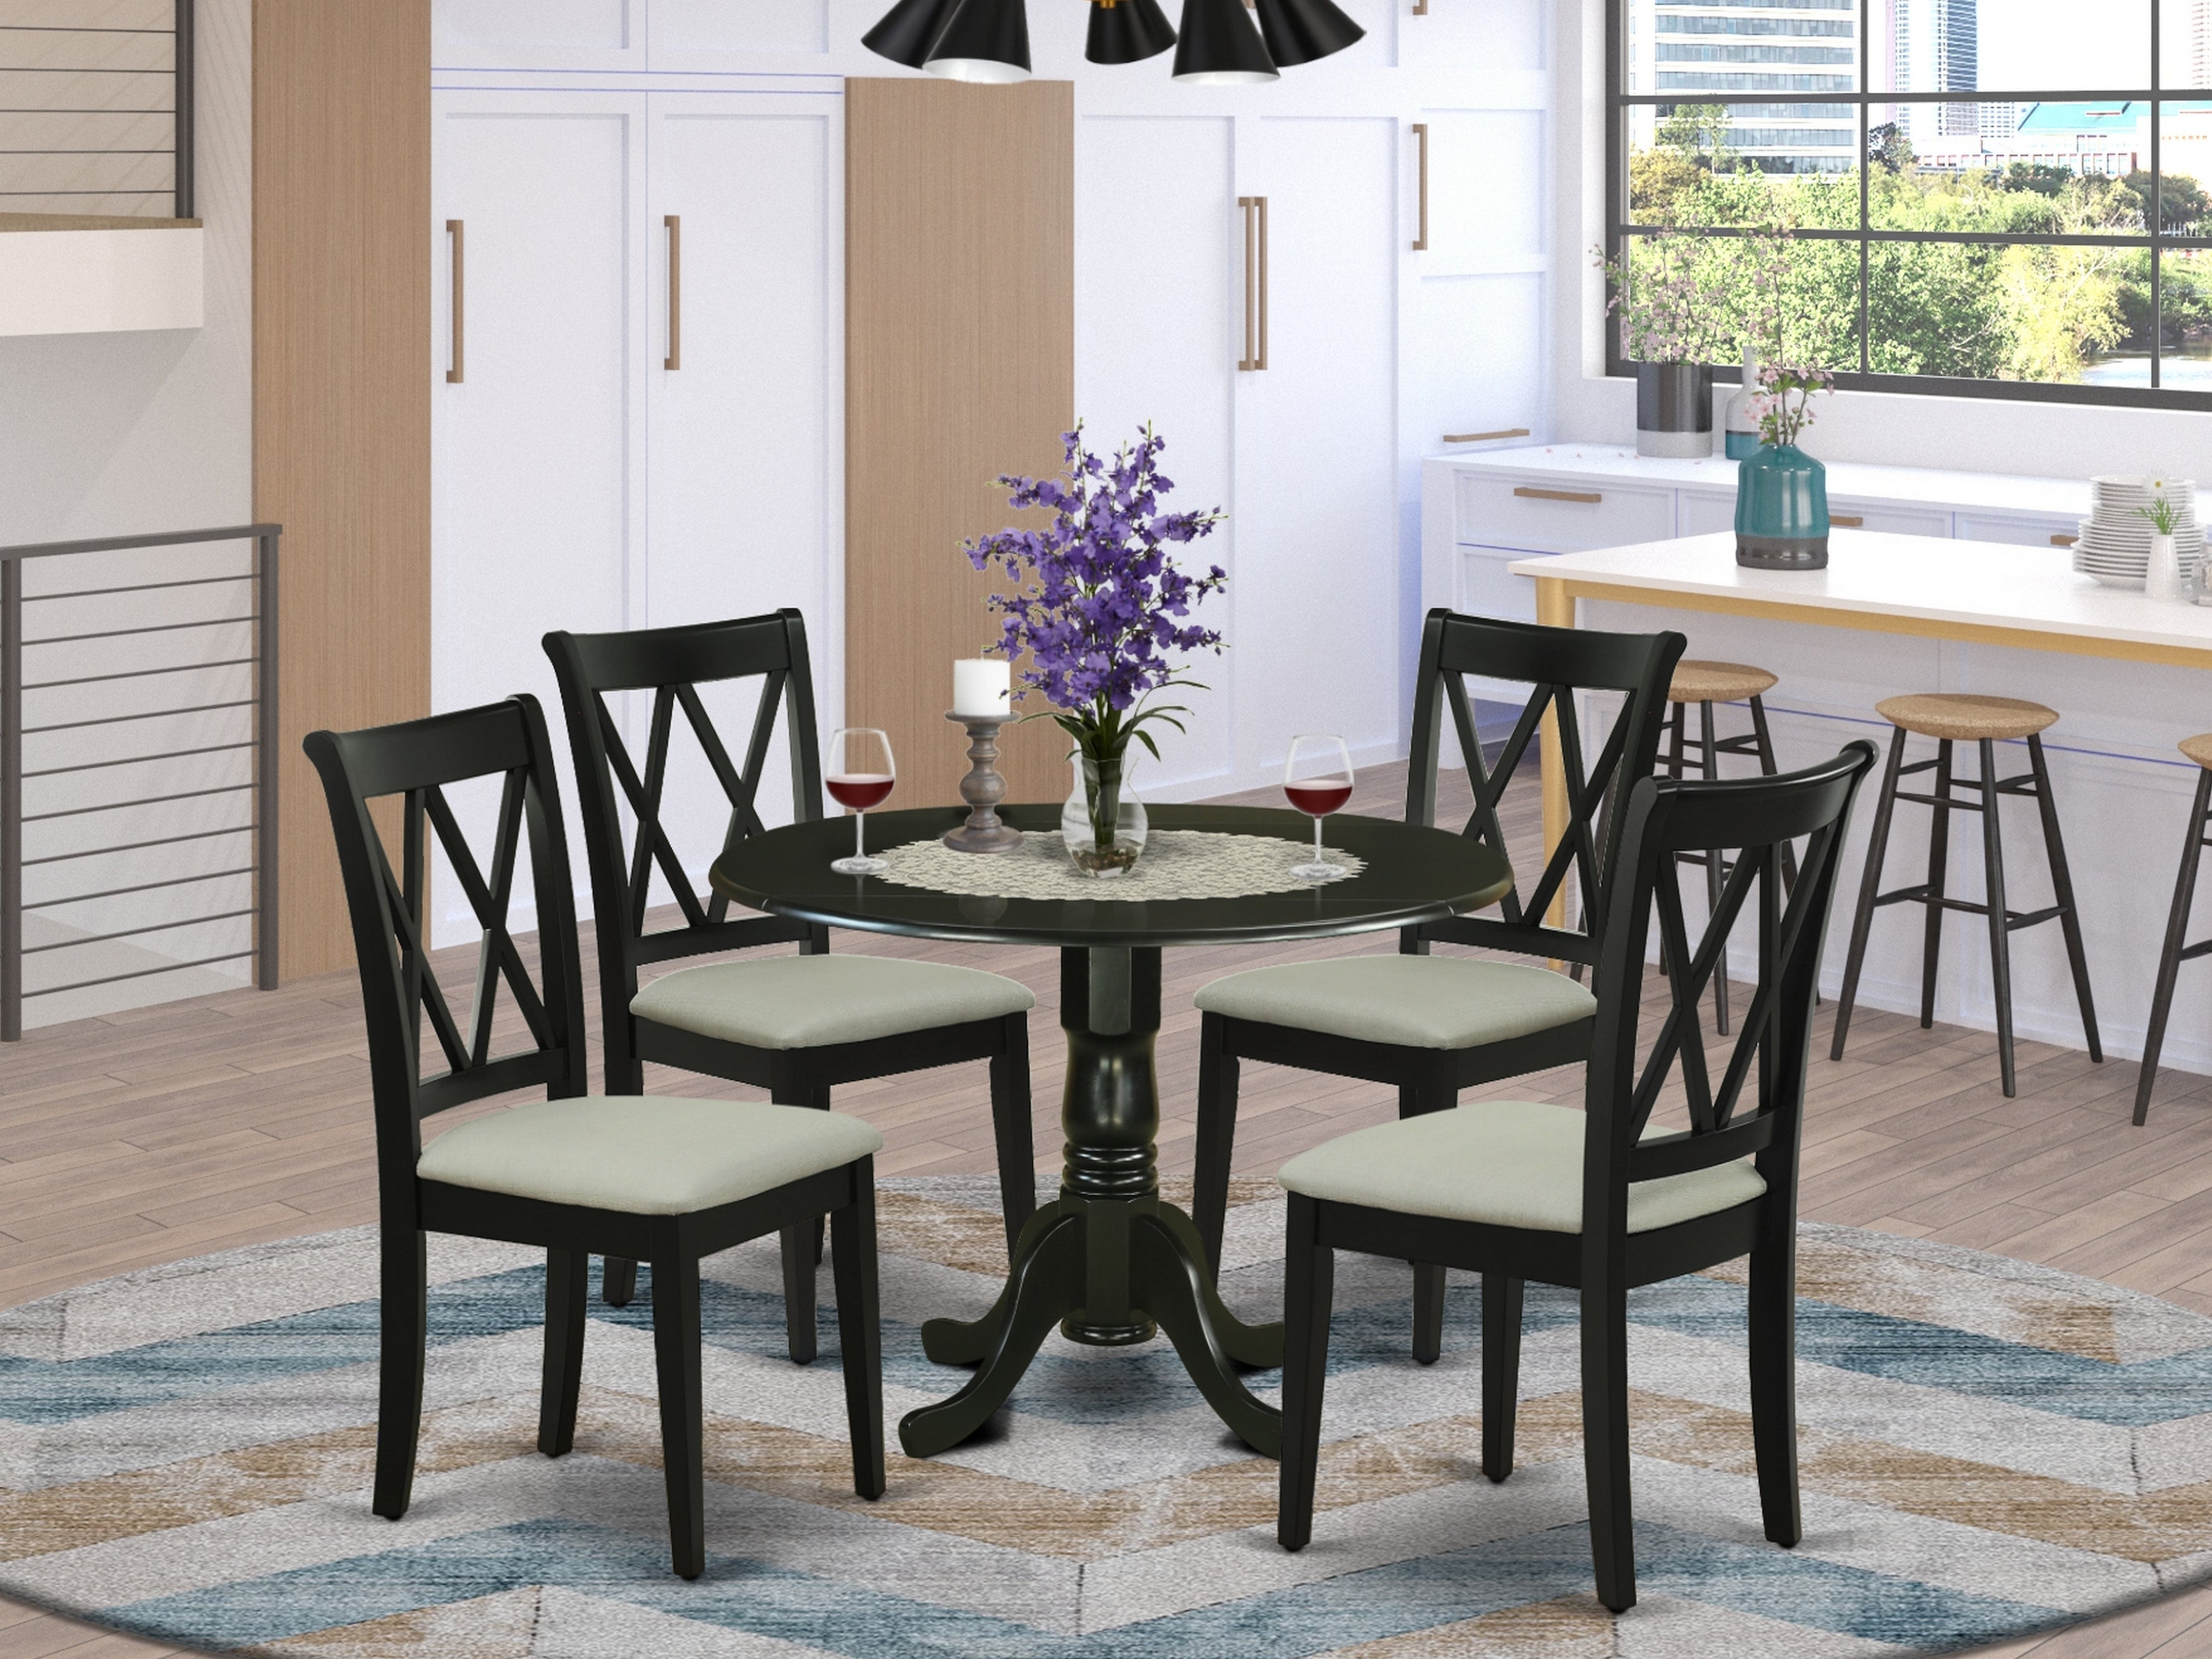 DLCL5-BLK-C 5Pc Dining Set Includes a Round Dinette Table with Drop Leaves and Four Double X Back Microfiber Seat Kitchen Chairs, Black Finish